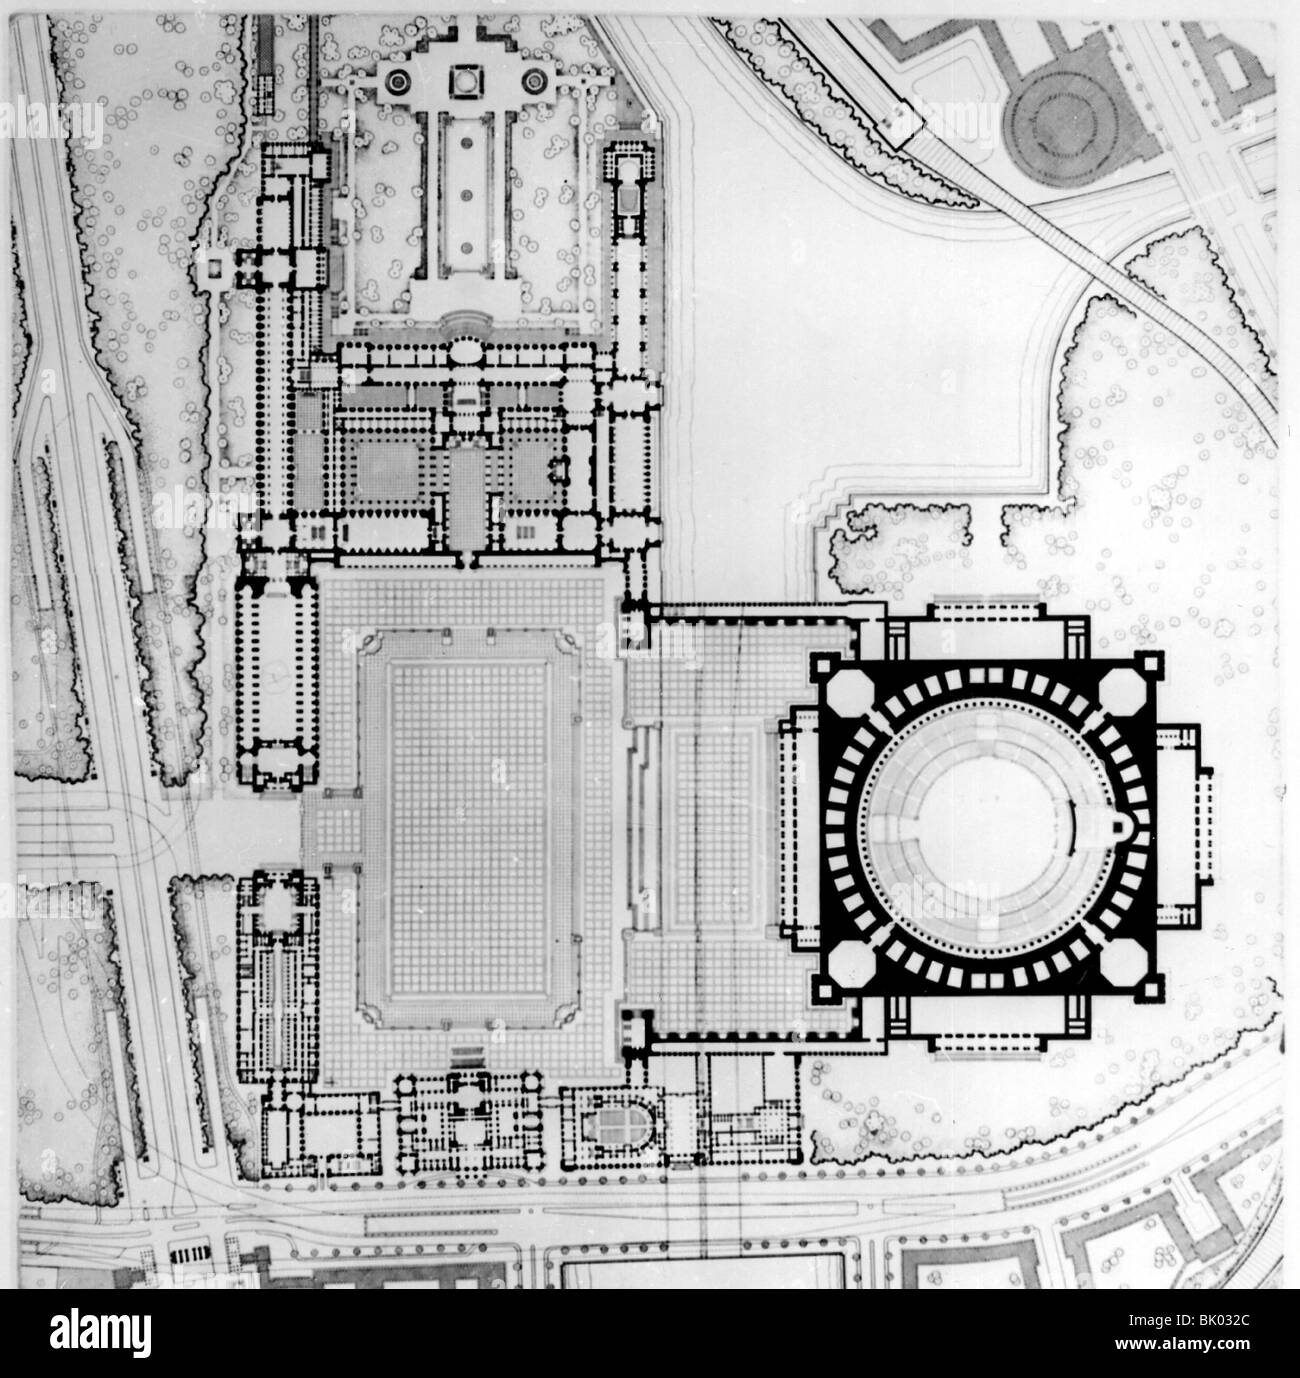 Nazism / National Socialism, architecture, capital of the German Reich "Germania" (former Berlin), ground plan of "Great Hall" and "Fuehrer Palace", draft by Albert Speer, late 1930s, Stock Photo